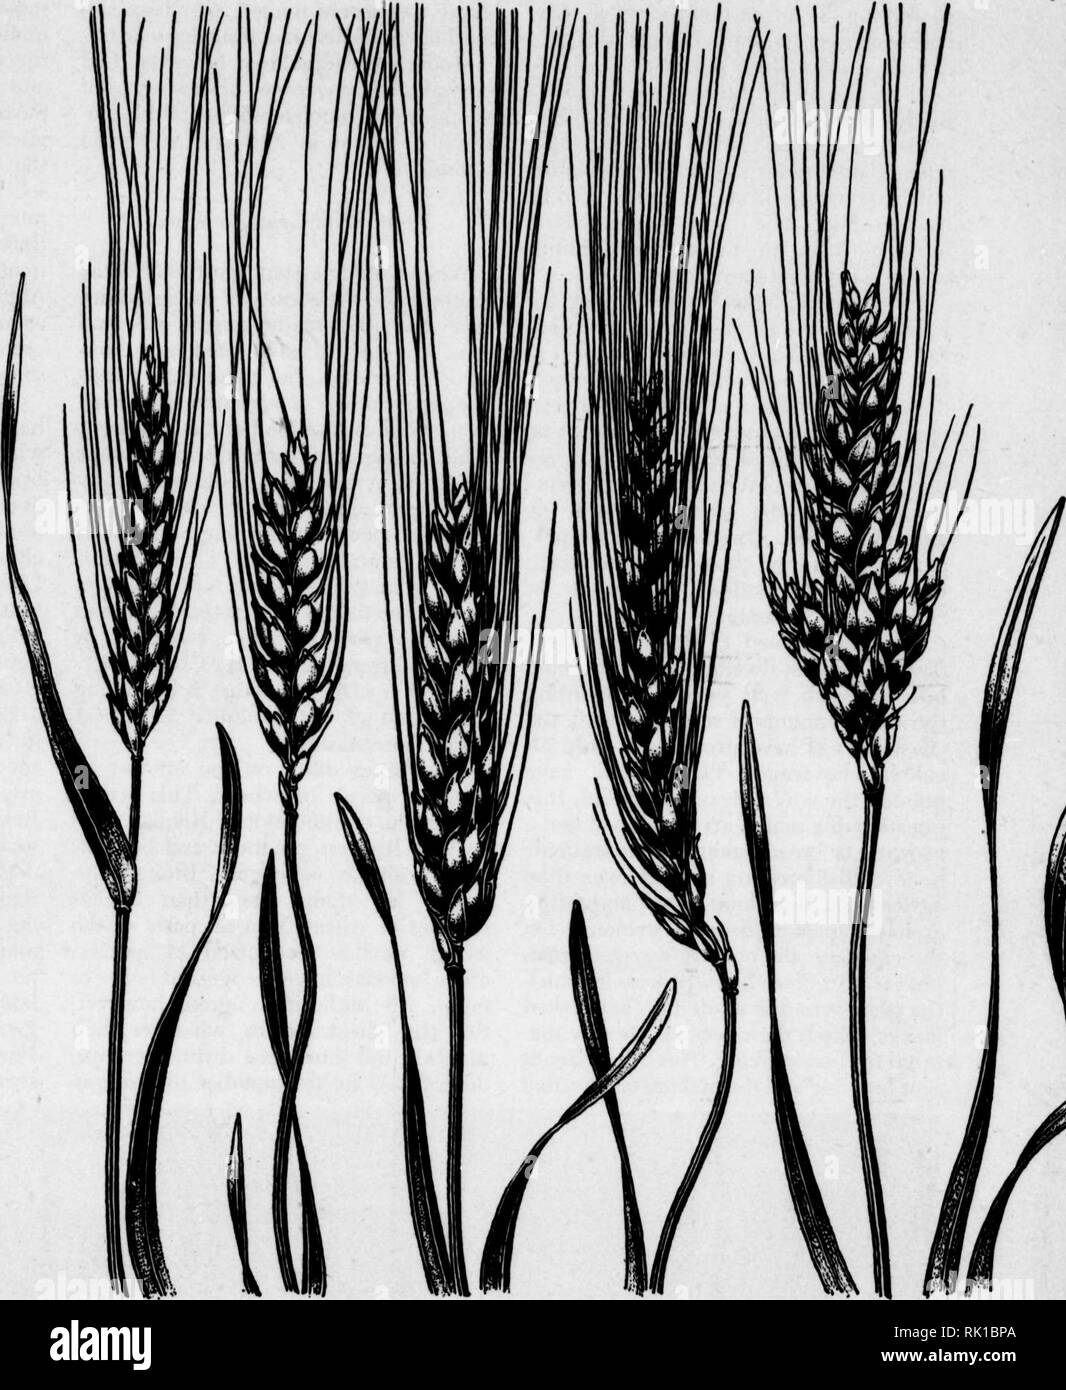 . Arthur and Fritz Kahn Collection 1889-1932. Kahn, Fritz 1888-1968; Kahn, Arthur David 1850-1928; Natural history illustrators; Natural history. FOURTEEN SPECIES OF WHEAT are shown actual size. From left to right they are Triticum aegilopoides (wild einkorn), T. monocojocum (einkorn), T. dicoc- coides (wild emmer), T, dicoccum (emmer), T. durum (macaroni wlieat), T. persicum (Persian wheat), T. fur- gidum (rivet wheat), T, polonicum (Polish wheat), T. and G, are recognized in wild and cul- tivated wheats. Another important diflFerence in wheats is intheir heads. Primitive cereals and many wil Stock Photo